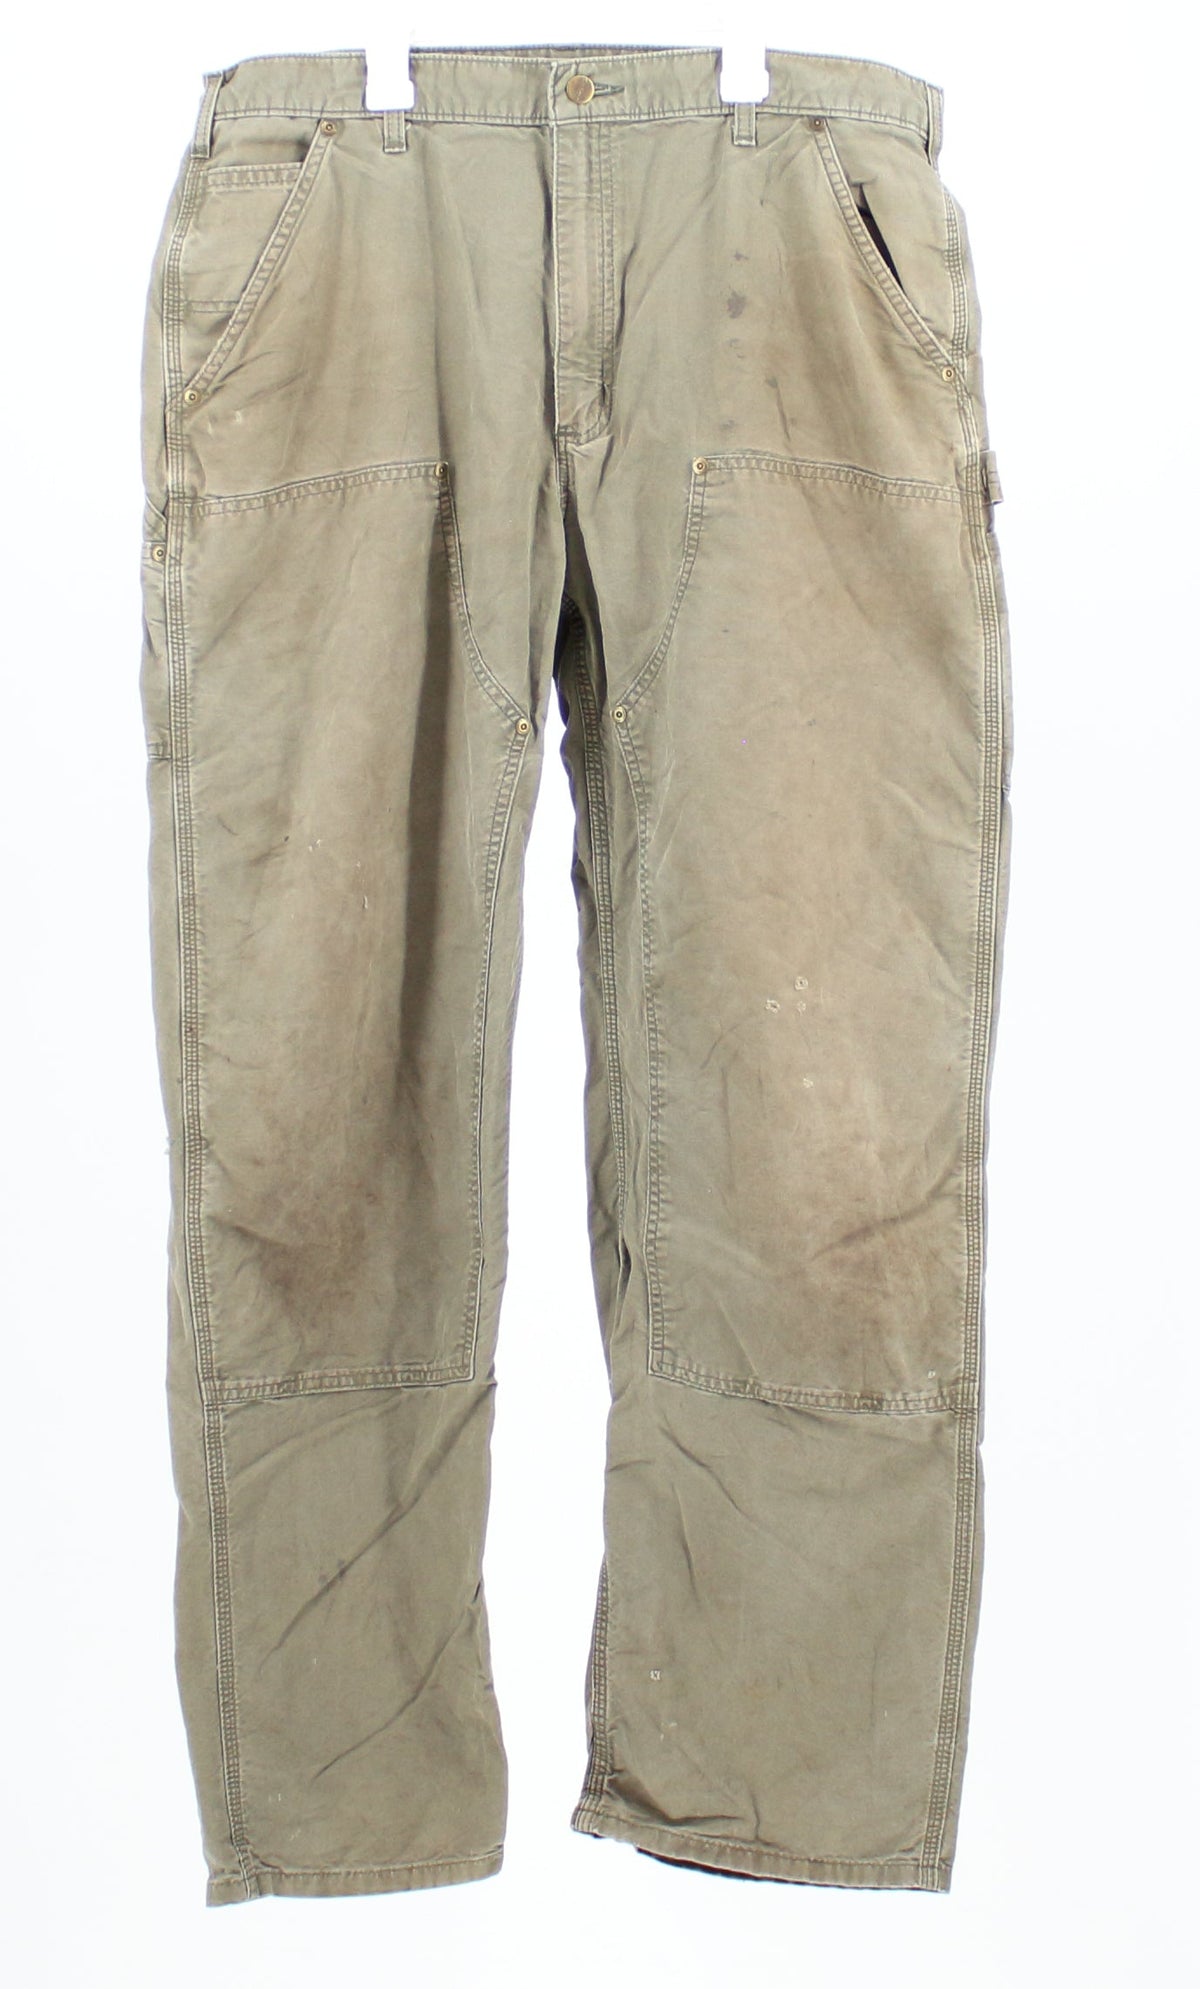 Carhartt Dungree Fit Army Green Pants